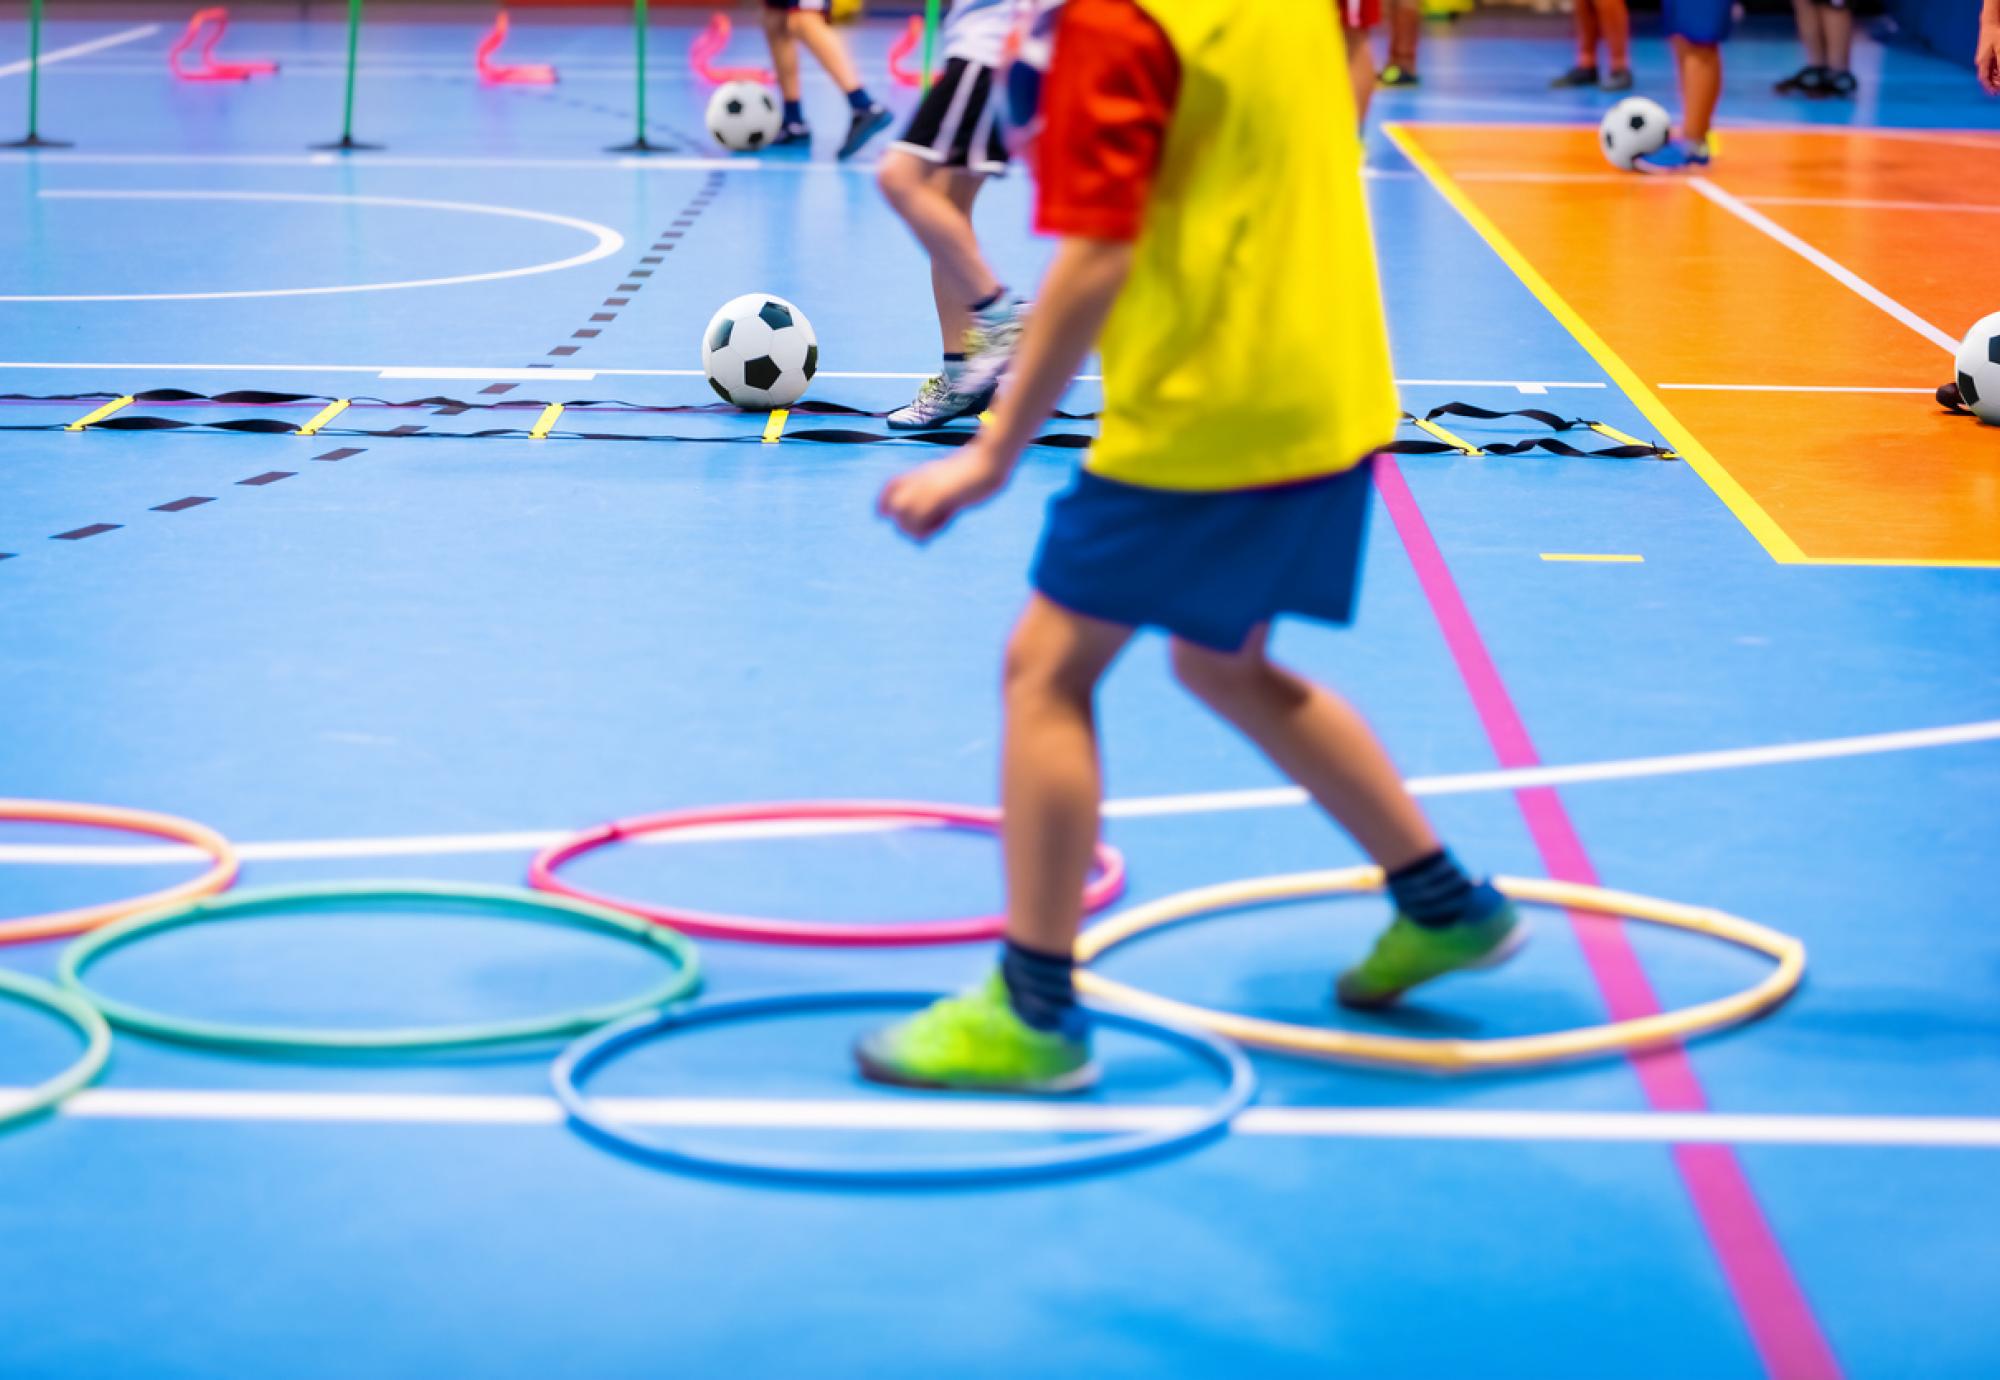 Child taking part in out-of-school sporting activities